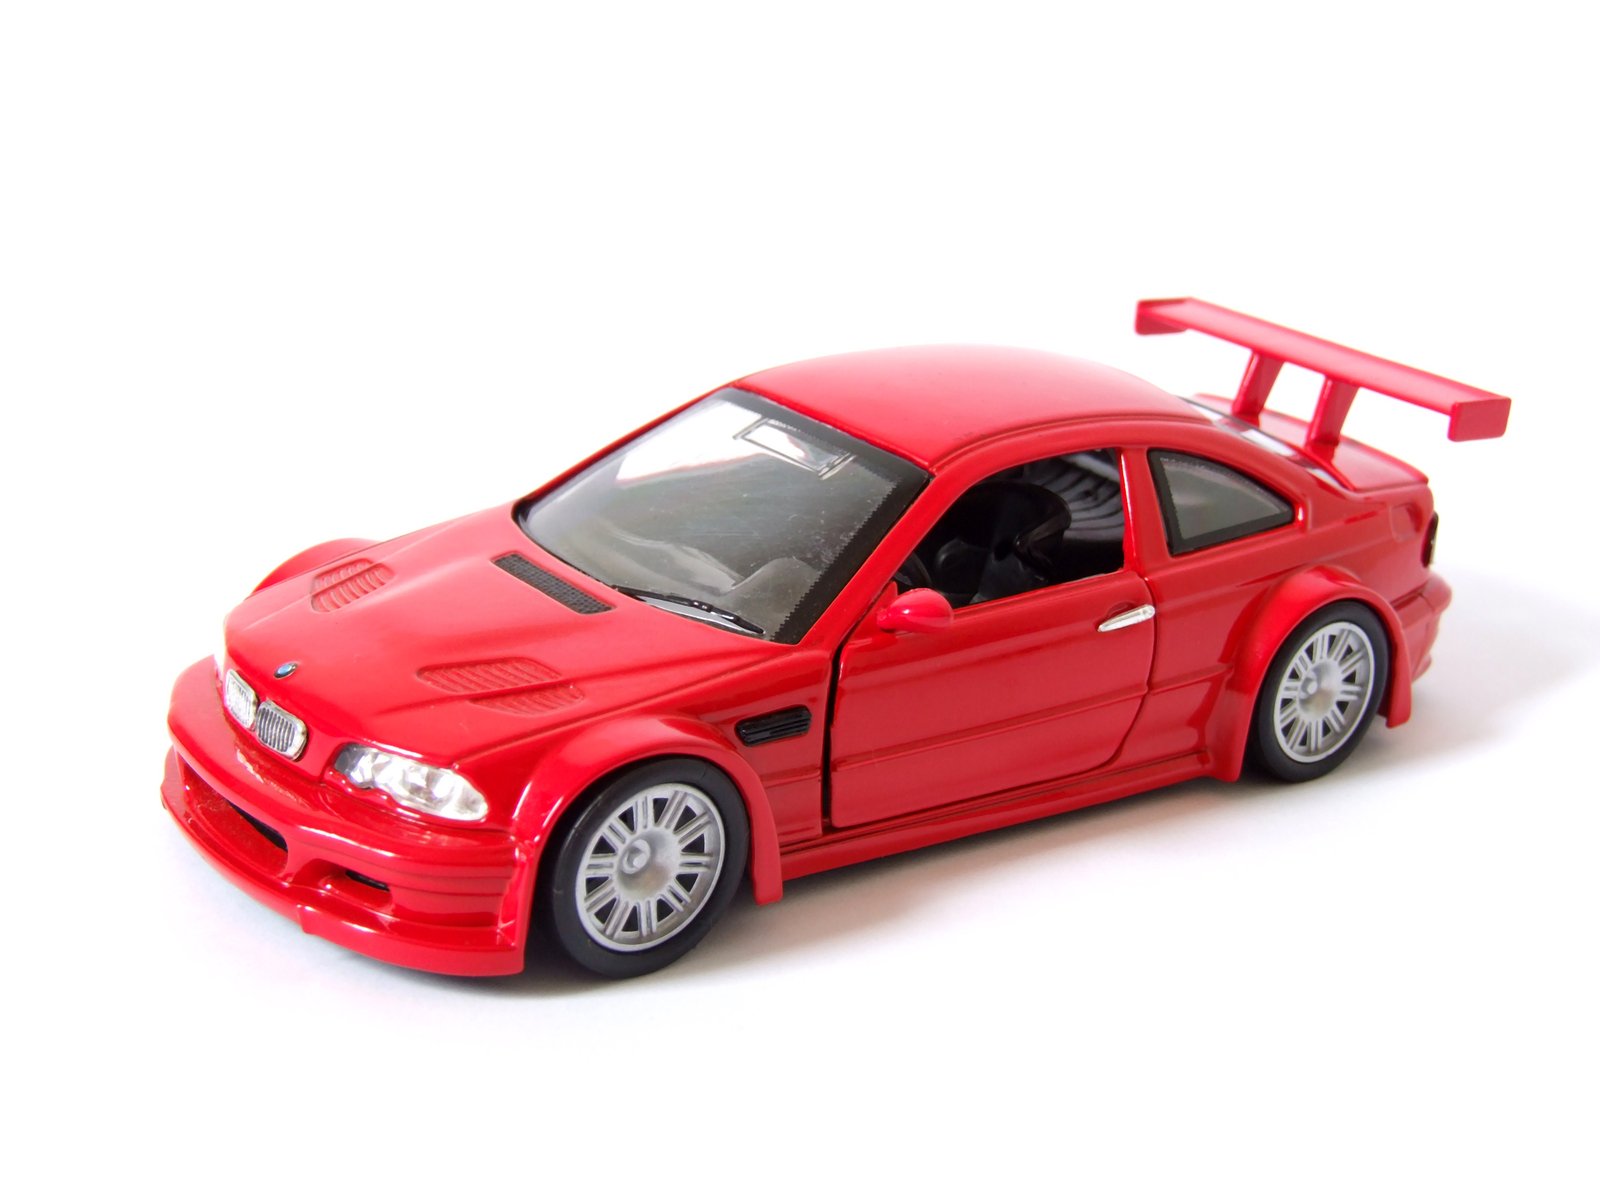 a model red racing car with the hood up